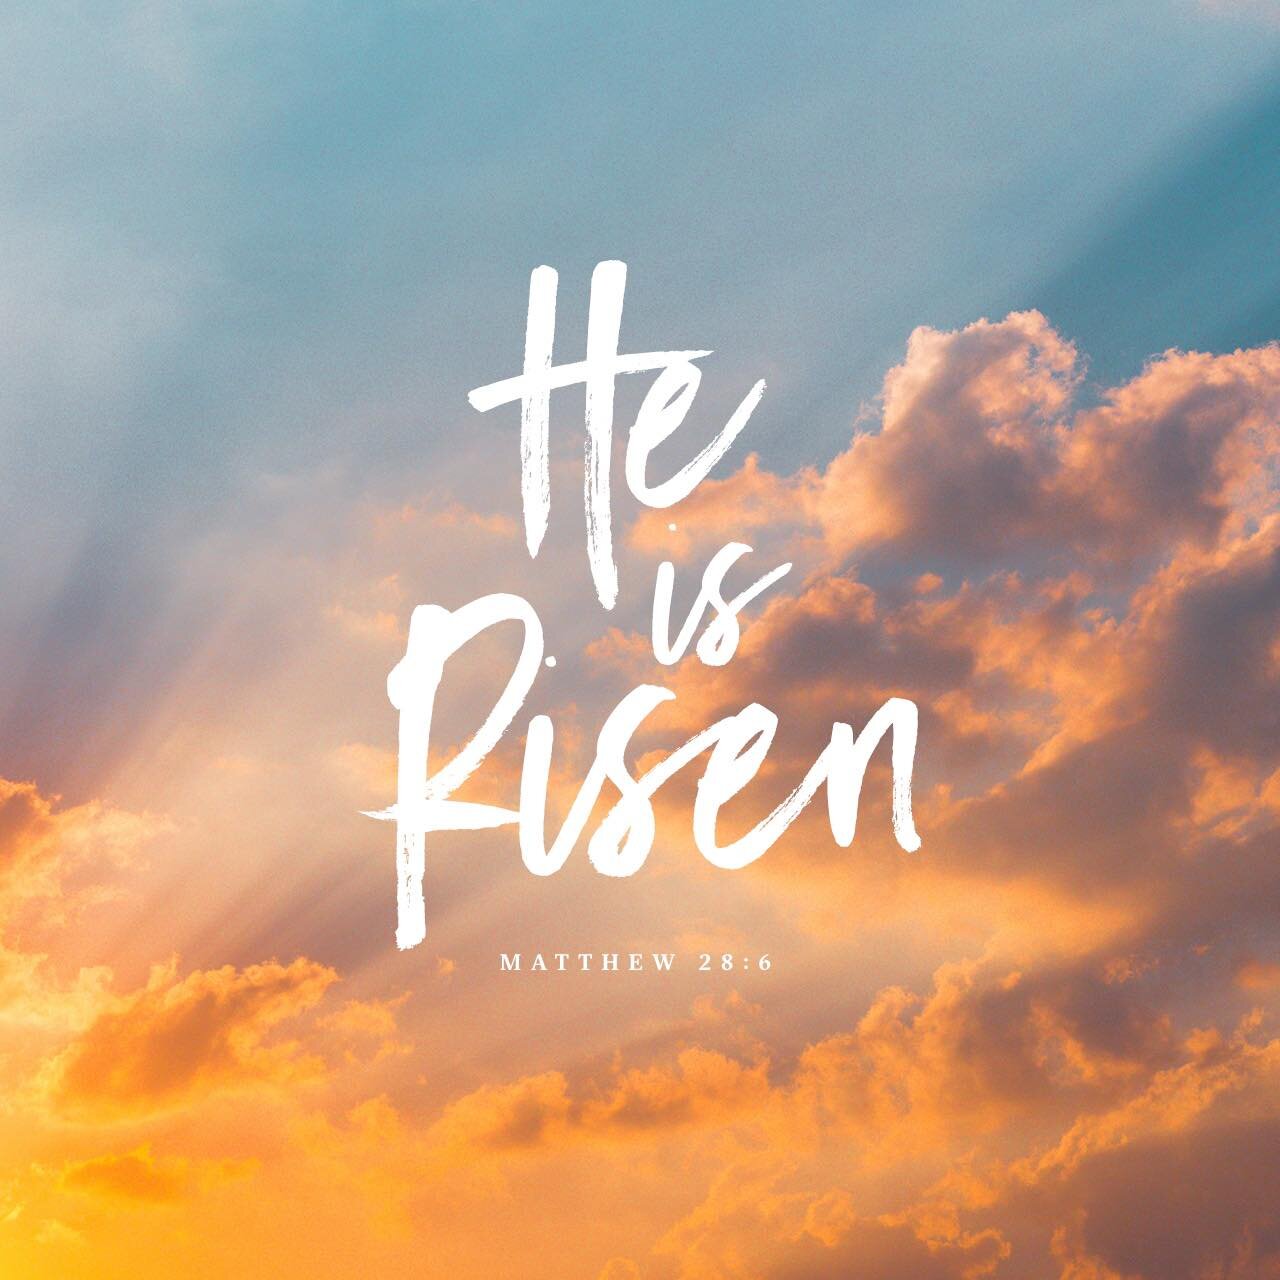 &ldquo;Why do you seek the living among the dead? He is not here, He is risen.&rdquo;
Luke 24:5-6